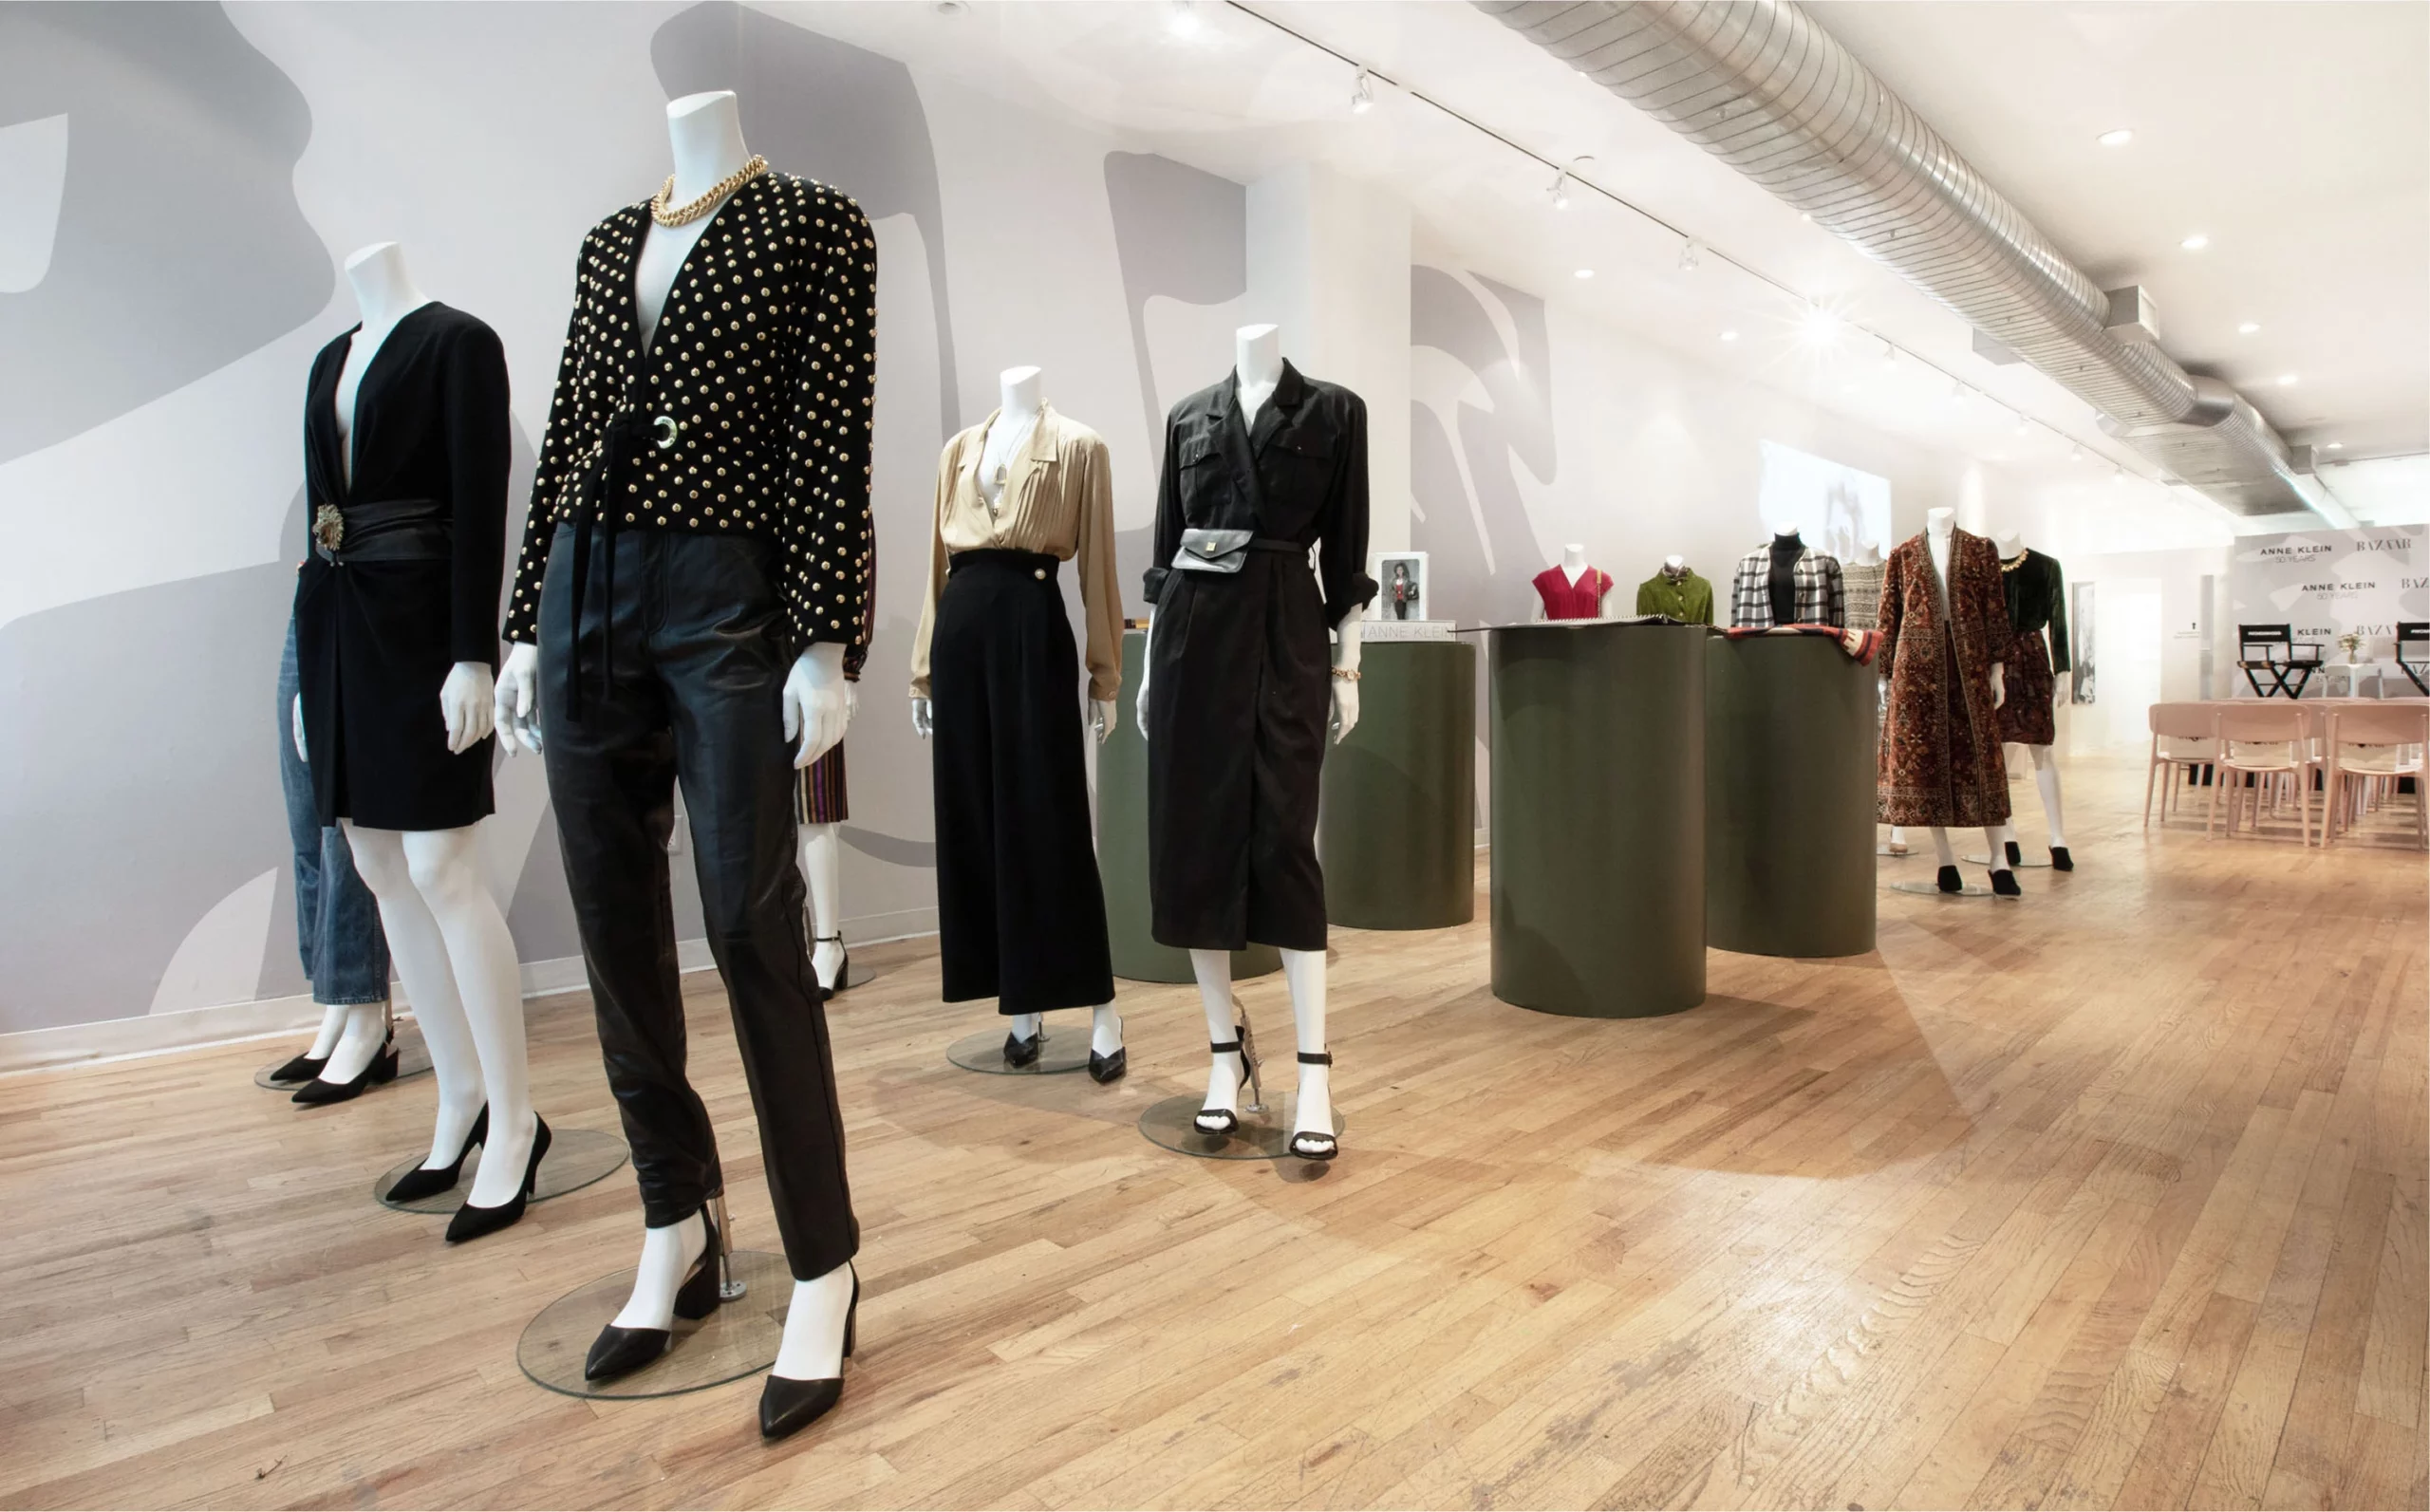 Anne Klein pop up shop showroom floor showing various manicans and garments with light wood floor and white walls